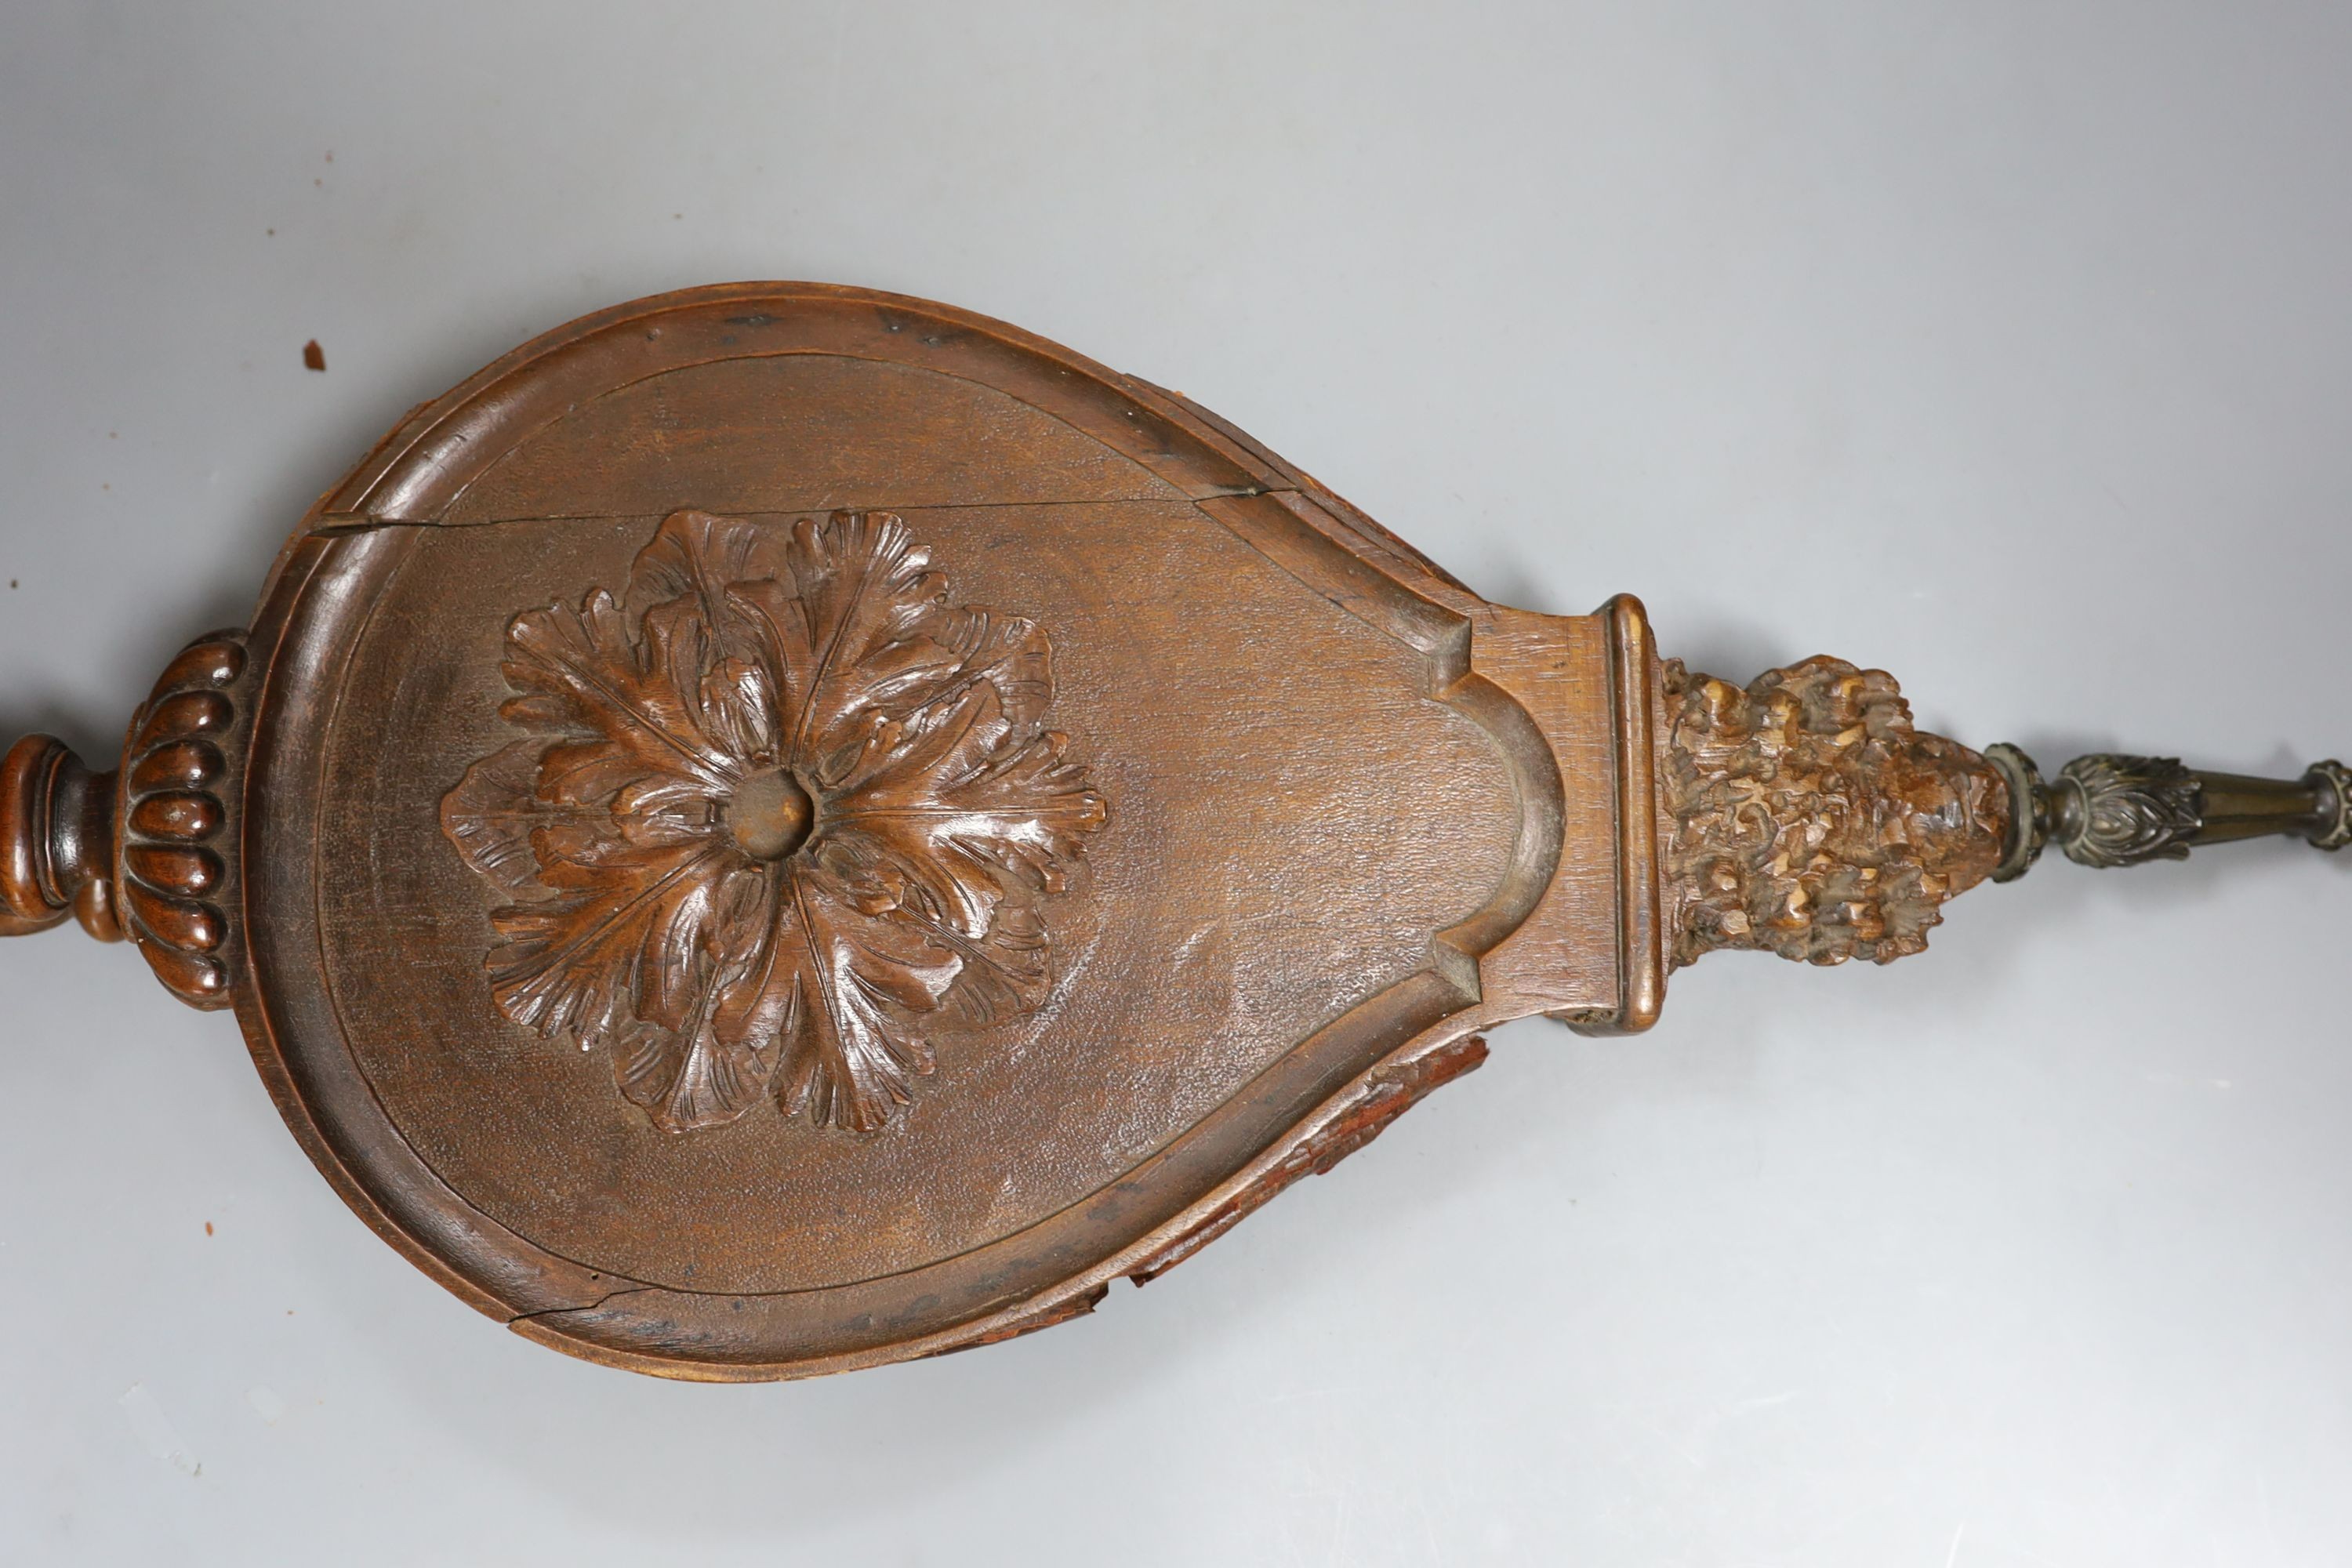 A pair of 19th century finely carved French walnut fire bellows - 62cm long